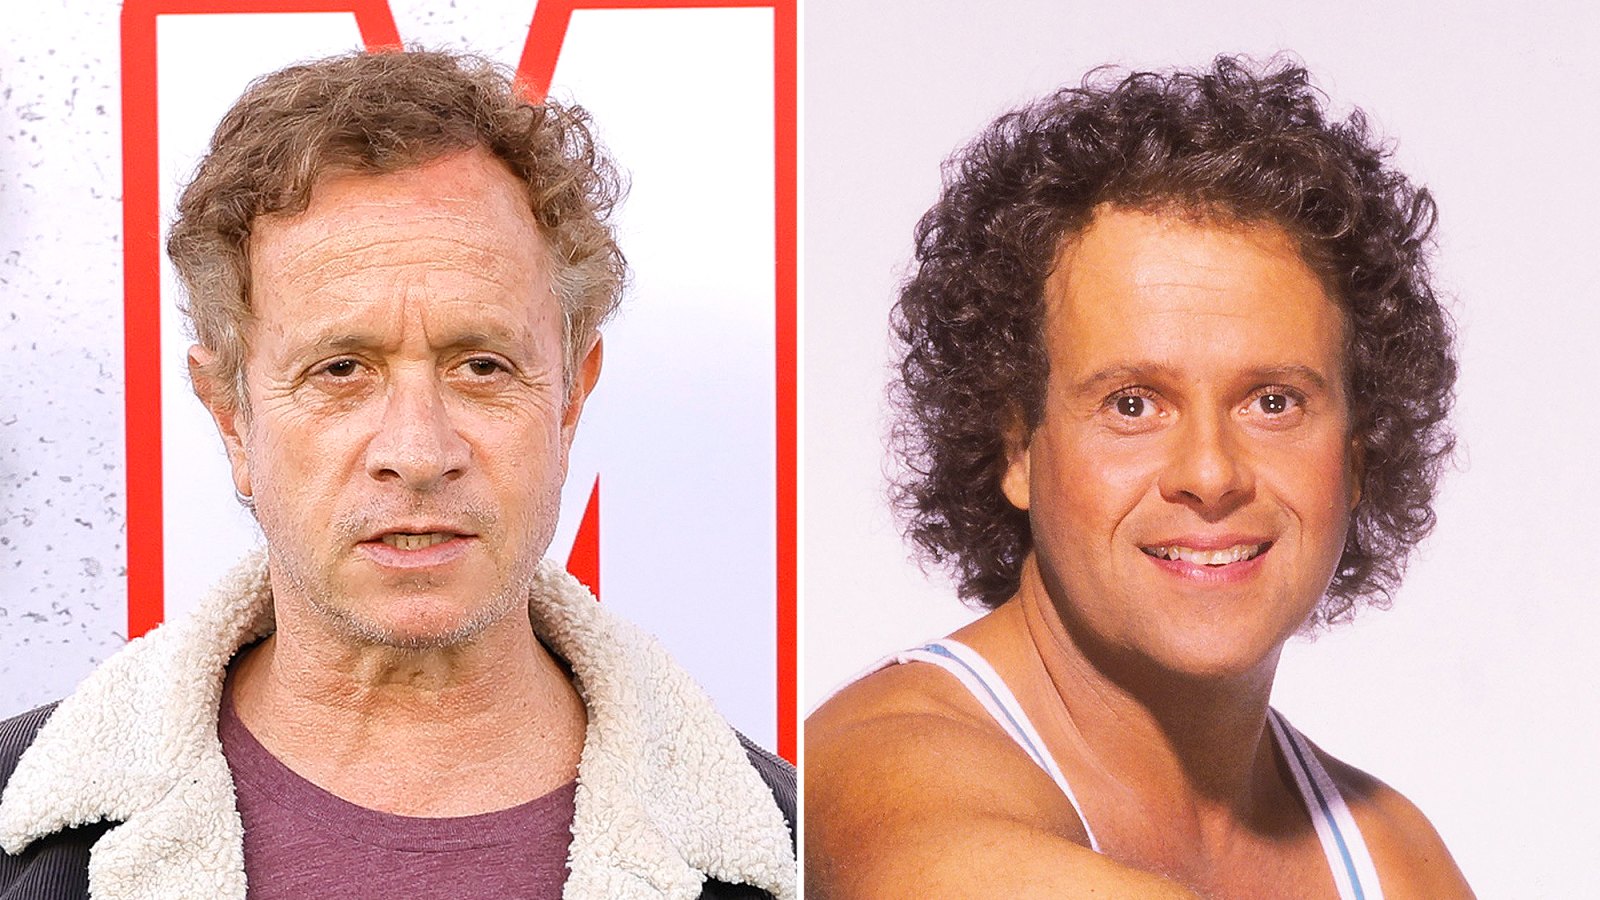 Everything to Know About the Richard Simmons Biopic Starring Pauly Shore